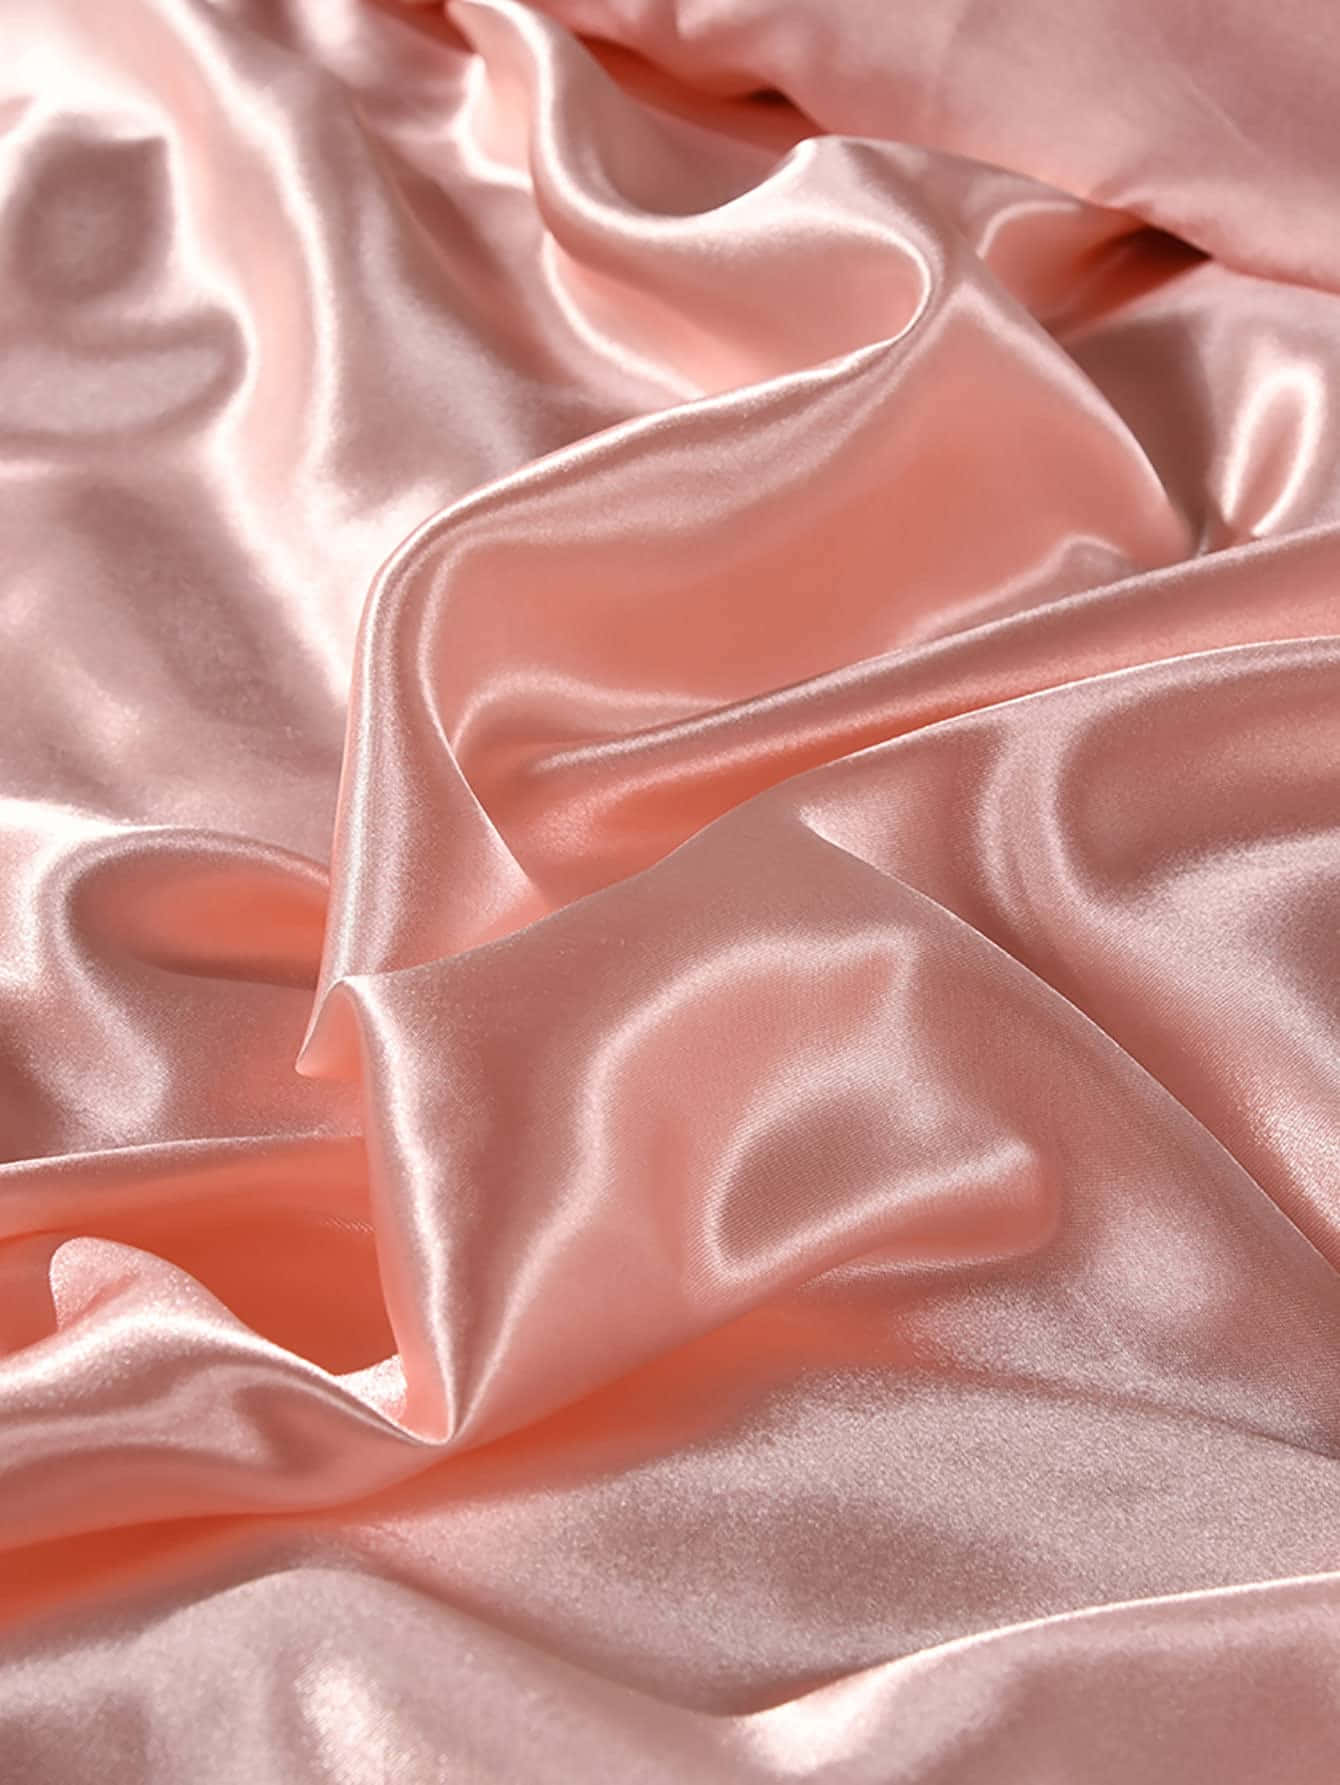 Download Get the Soft, Vibrant Look with Pink Silk Aesthetic Wallpaper